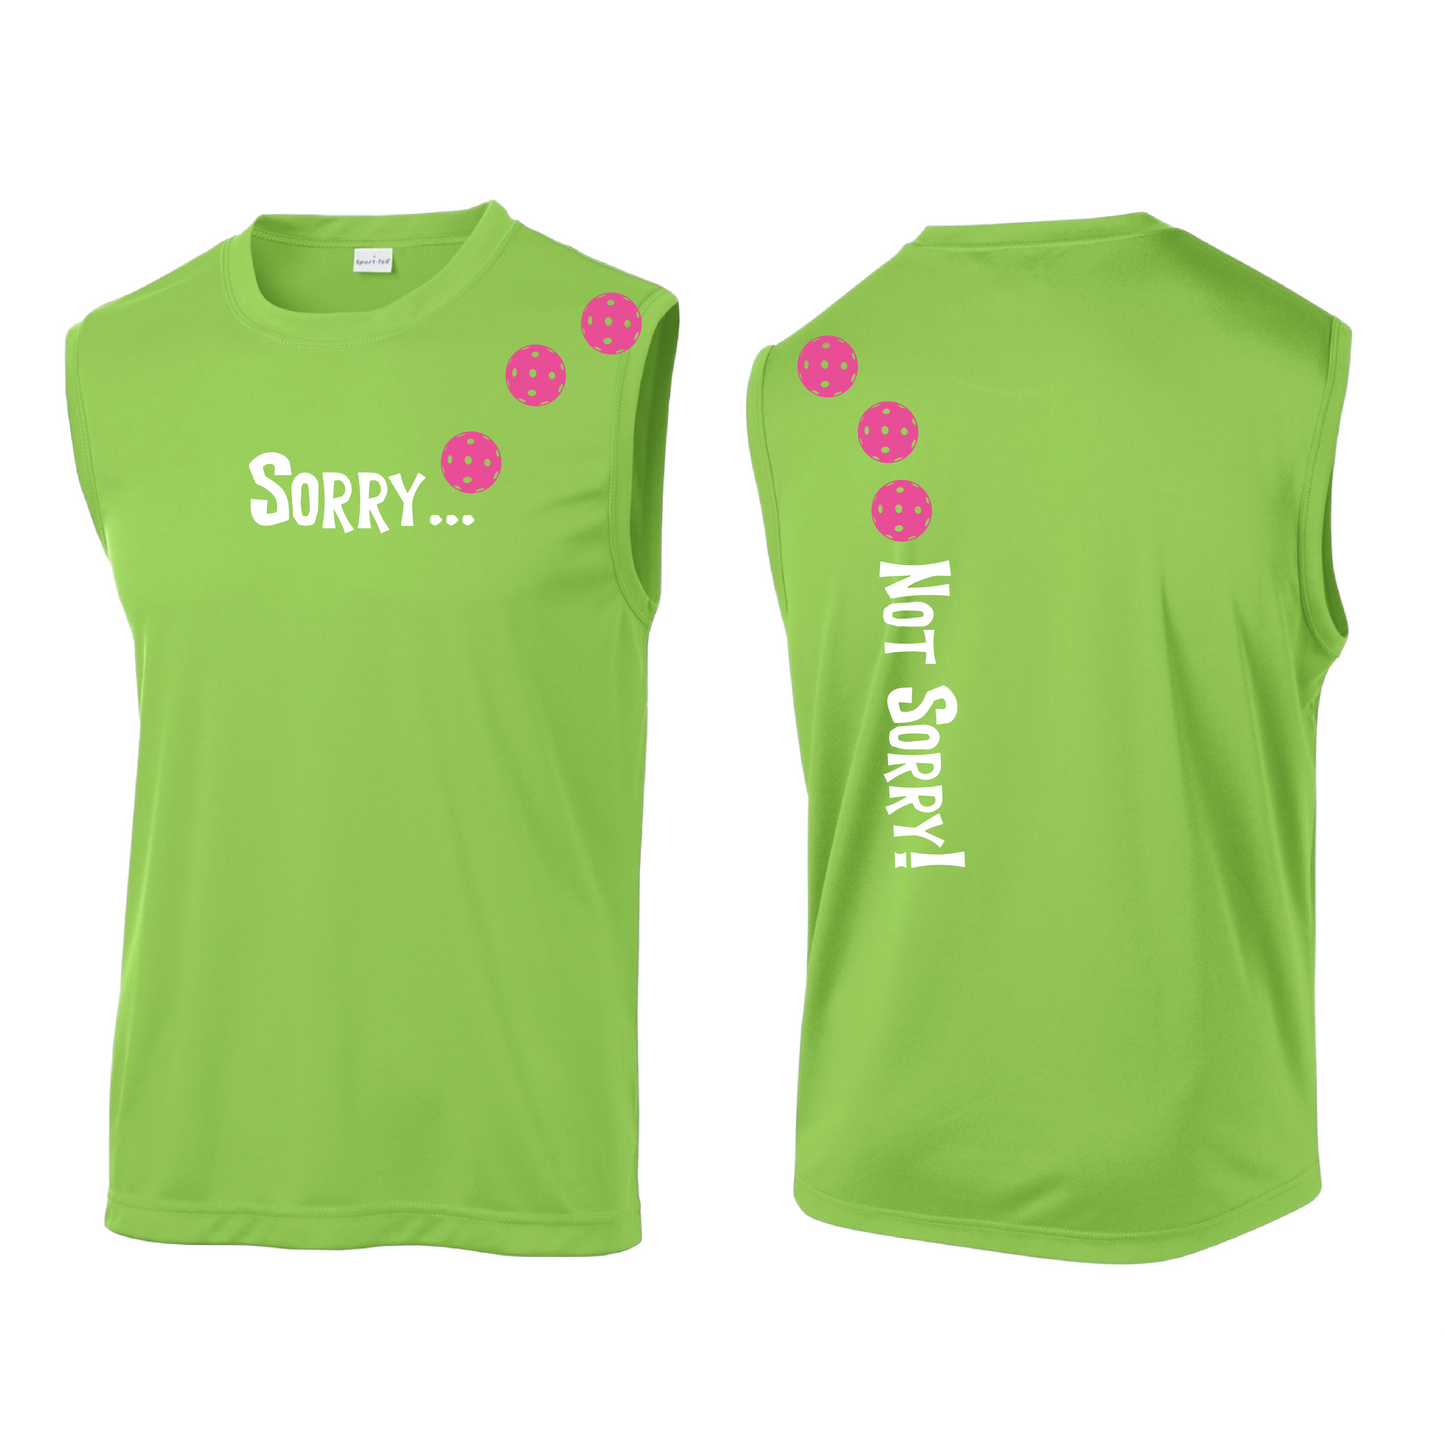 Sorry Not Sorry With Pickleballs (Pink Rainbow Red) Customizable | Men's Sleeveless Athletic Shirt | 100% Polyester